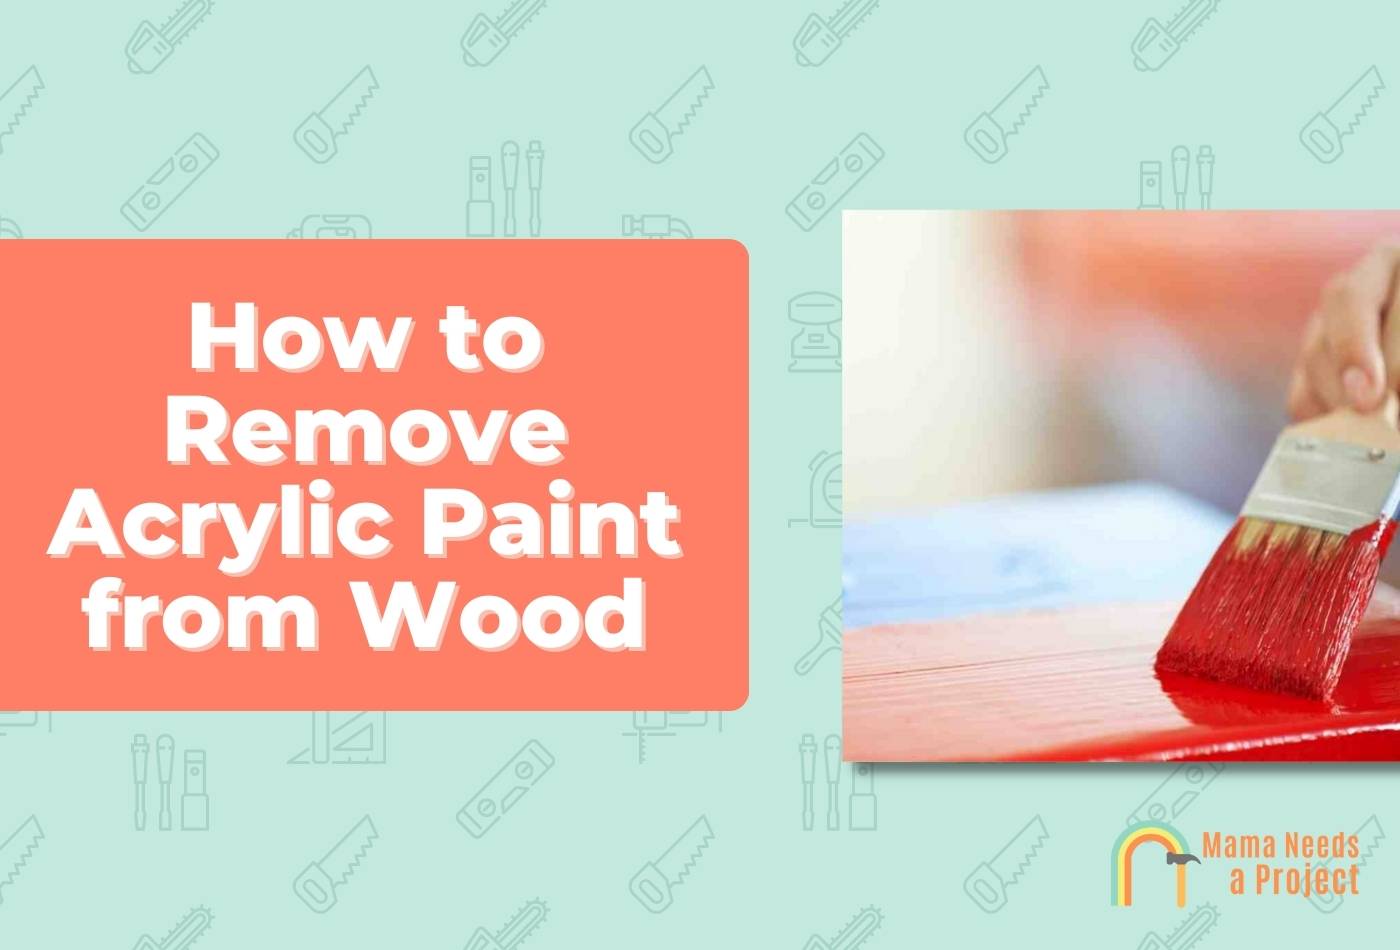 Tips to Remove Acrylic Paint from Wood